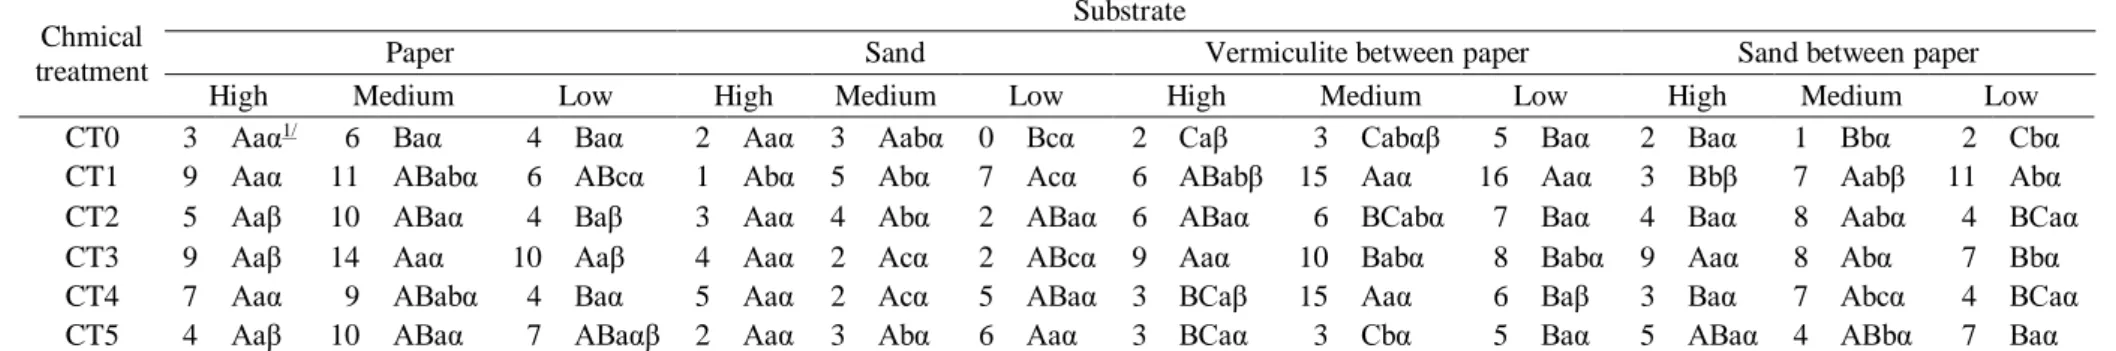 Table 2: Abnormal seedlings (%) derived from seeds with distinct levels of quality, chemically treated and subjected to the germination test in the standards of the Rules for Seed Analysis or in  alternative substrates